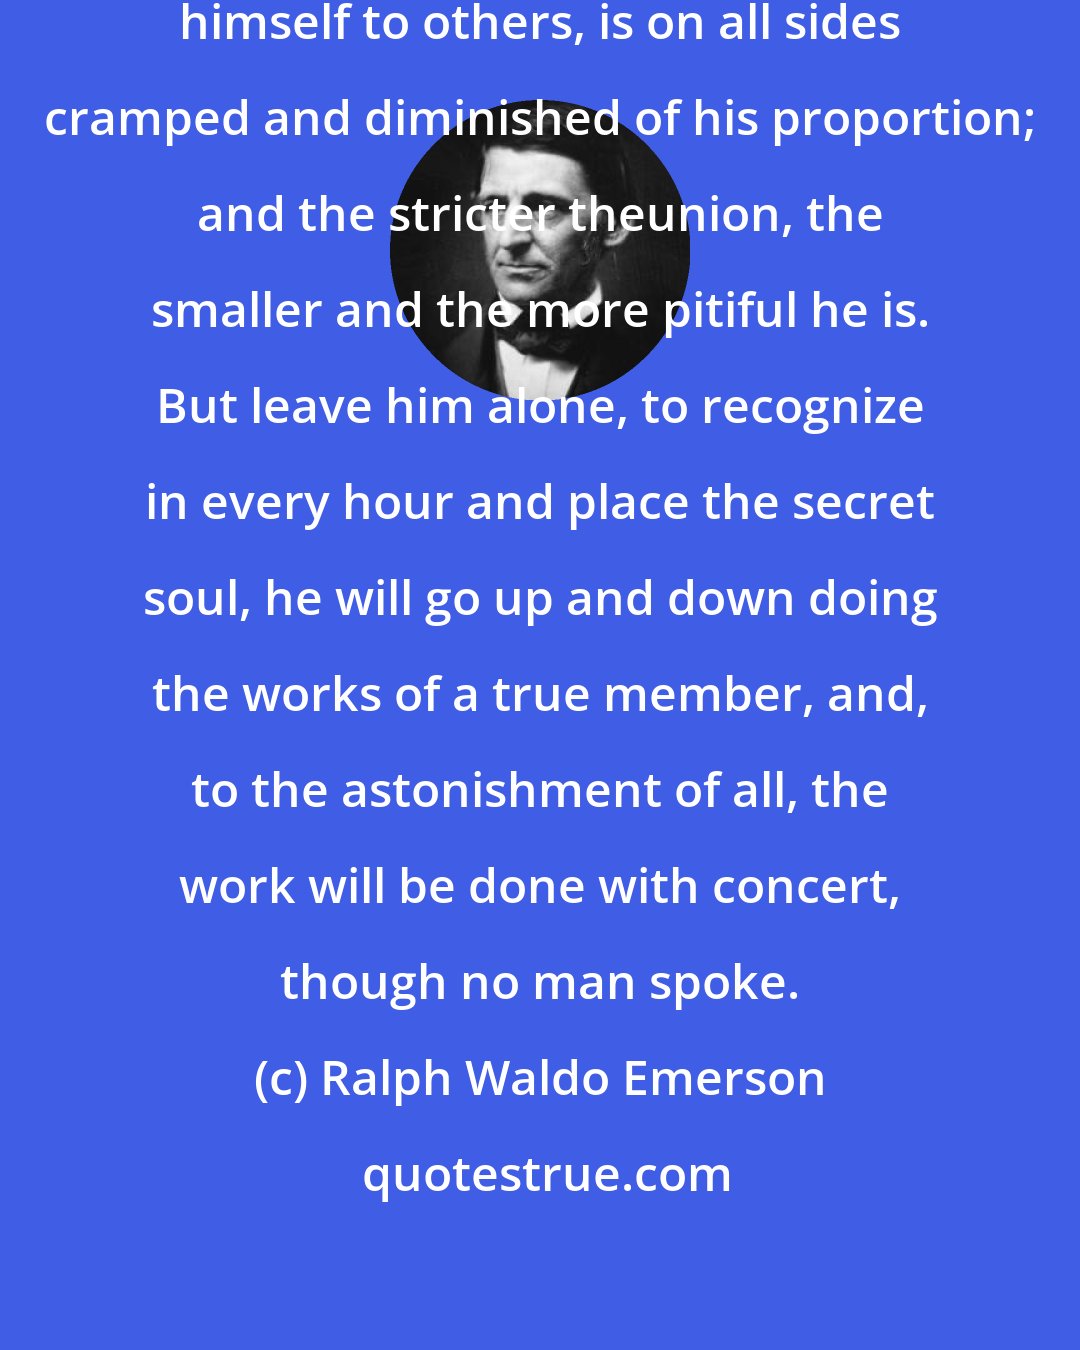 Ralph Waldo Emerson: Each man, if he attempts to join himself to others, is on all sides cramped and diminished of his proportion; and the stricter theunion, the smaller and the more pitiful he is. But leave him alone, to recognize in every hour and place the secret soul, he will go up and down doing the works of a true member, and, to the astonishment of all, the work will be done with concert, though no man spoke.